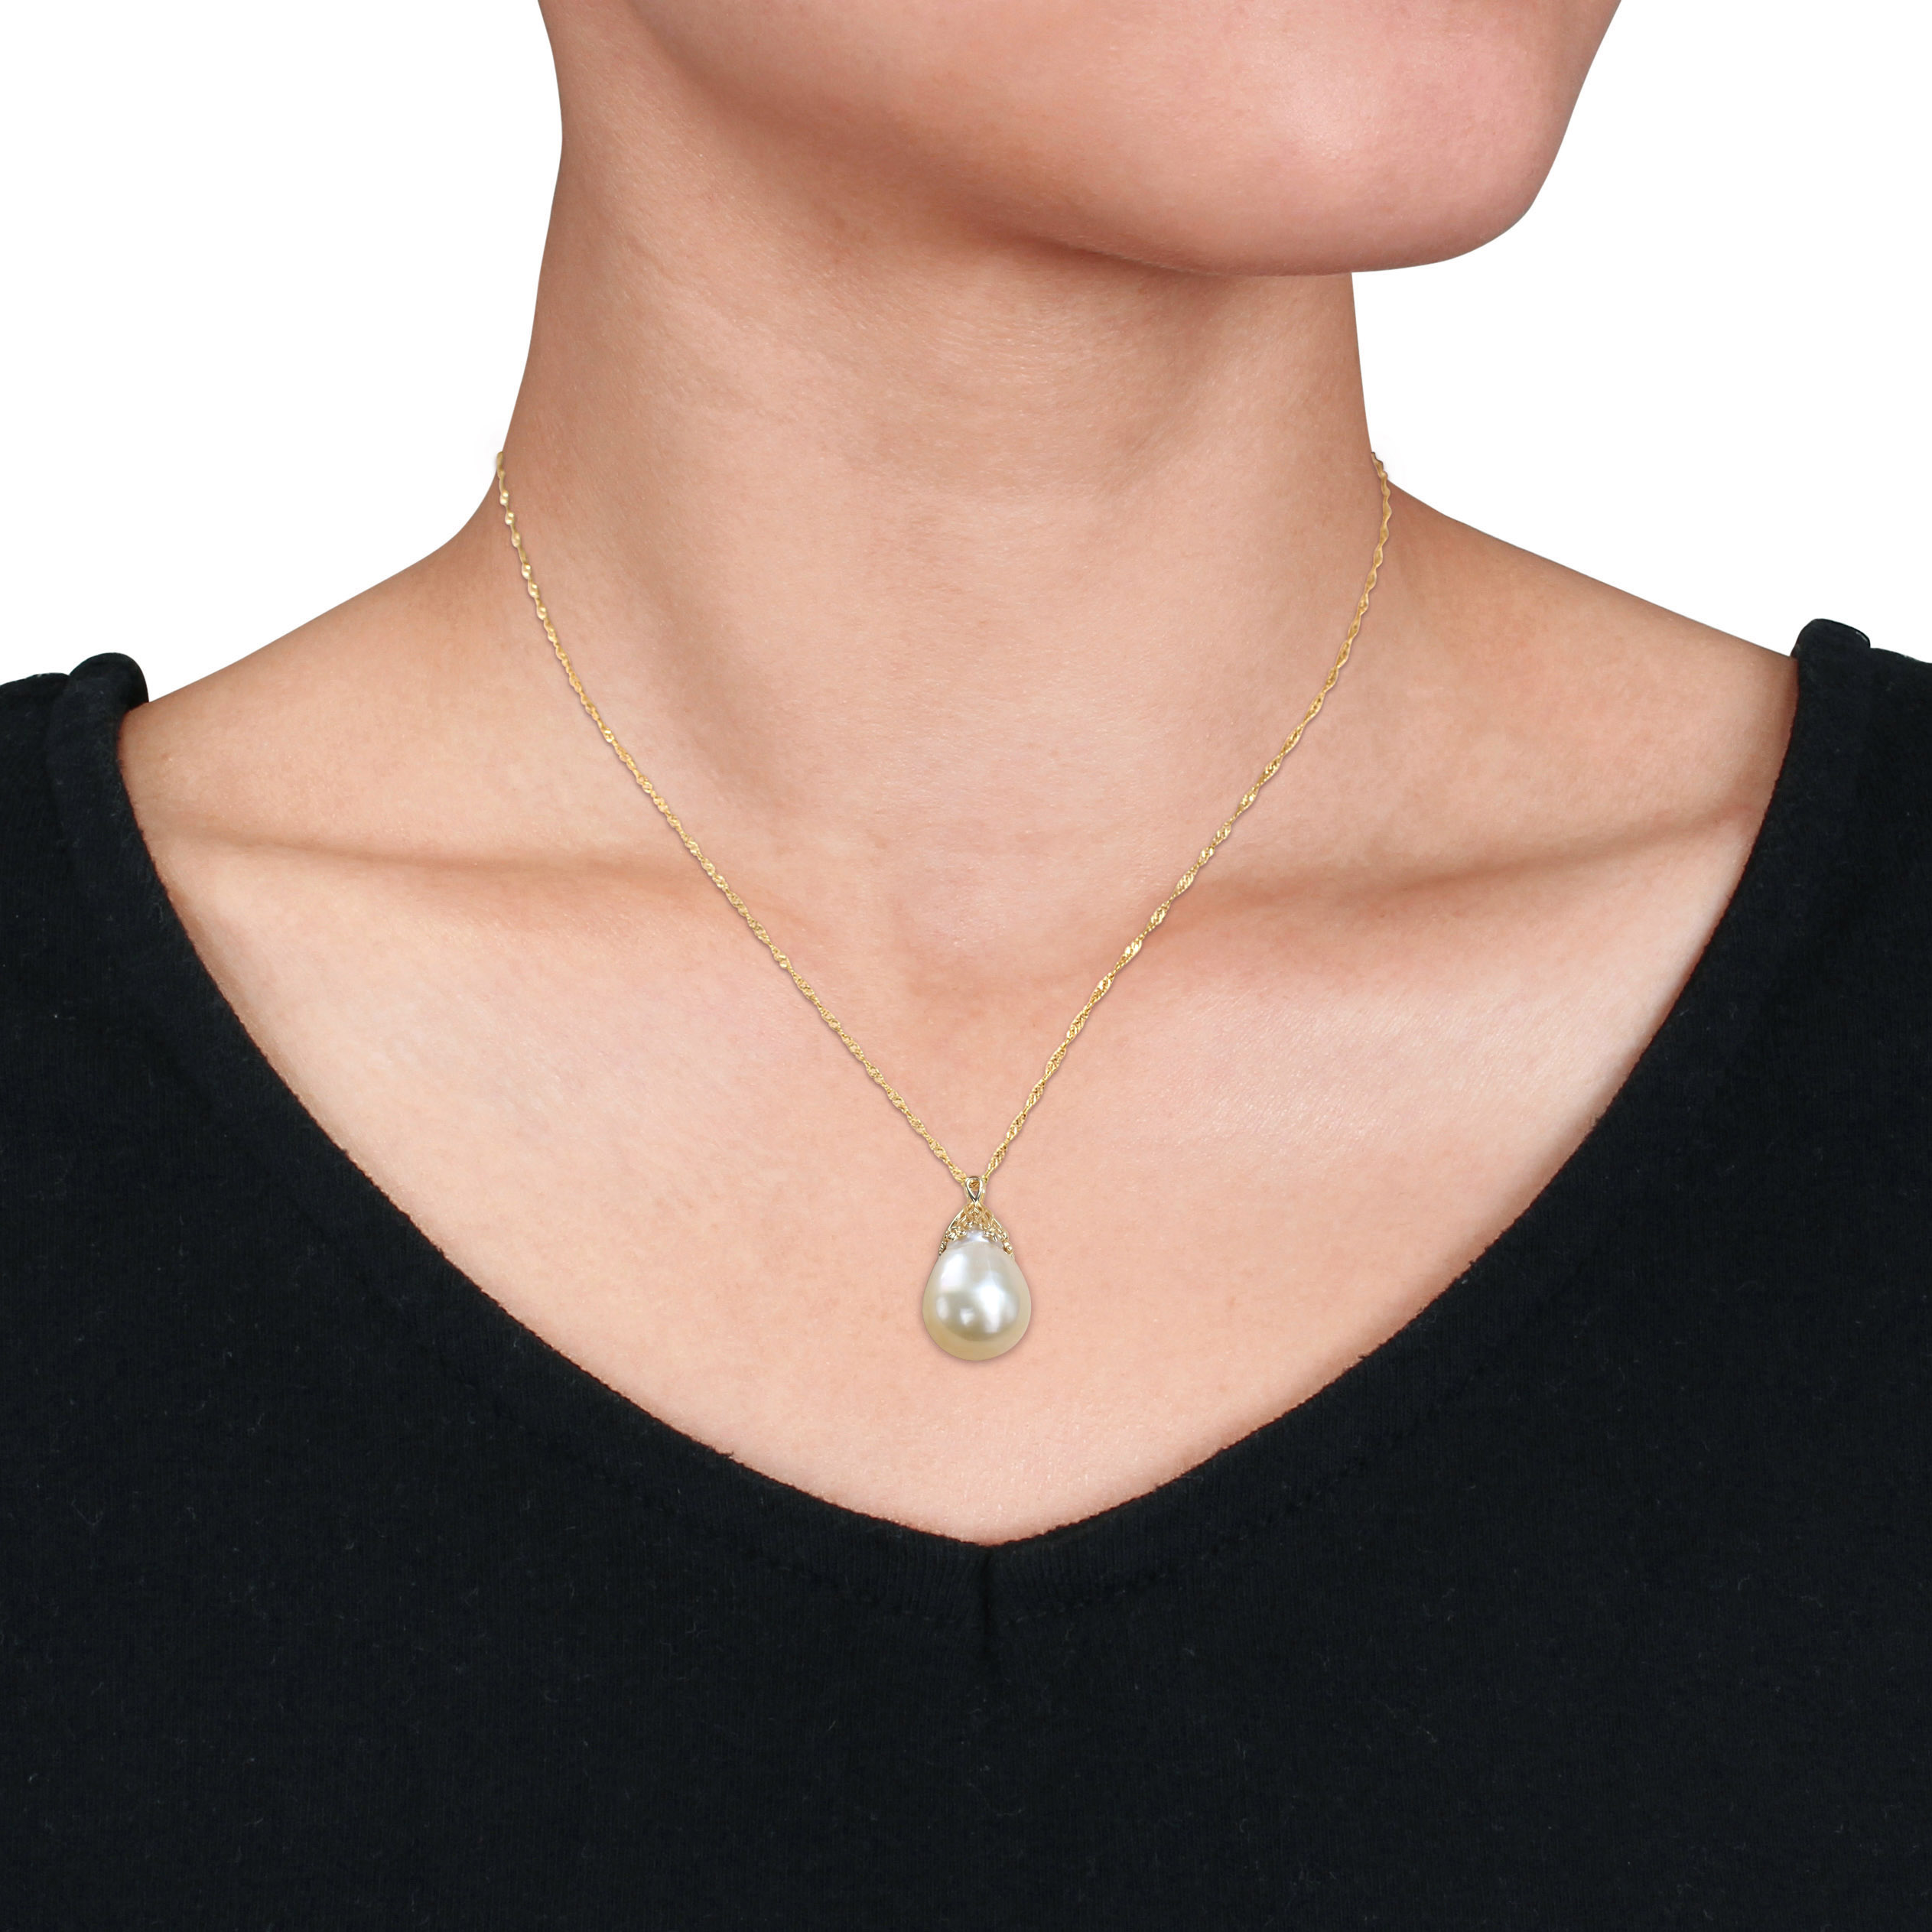 9-10 MM Drop South Sea Cultured Pearl Pendant with Chain in 14k Yellow Gold - 17 in.